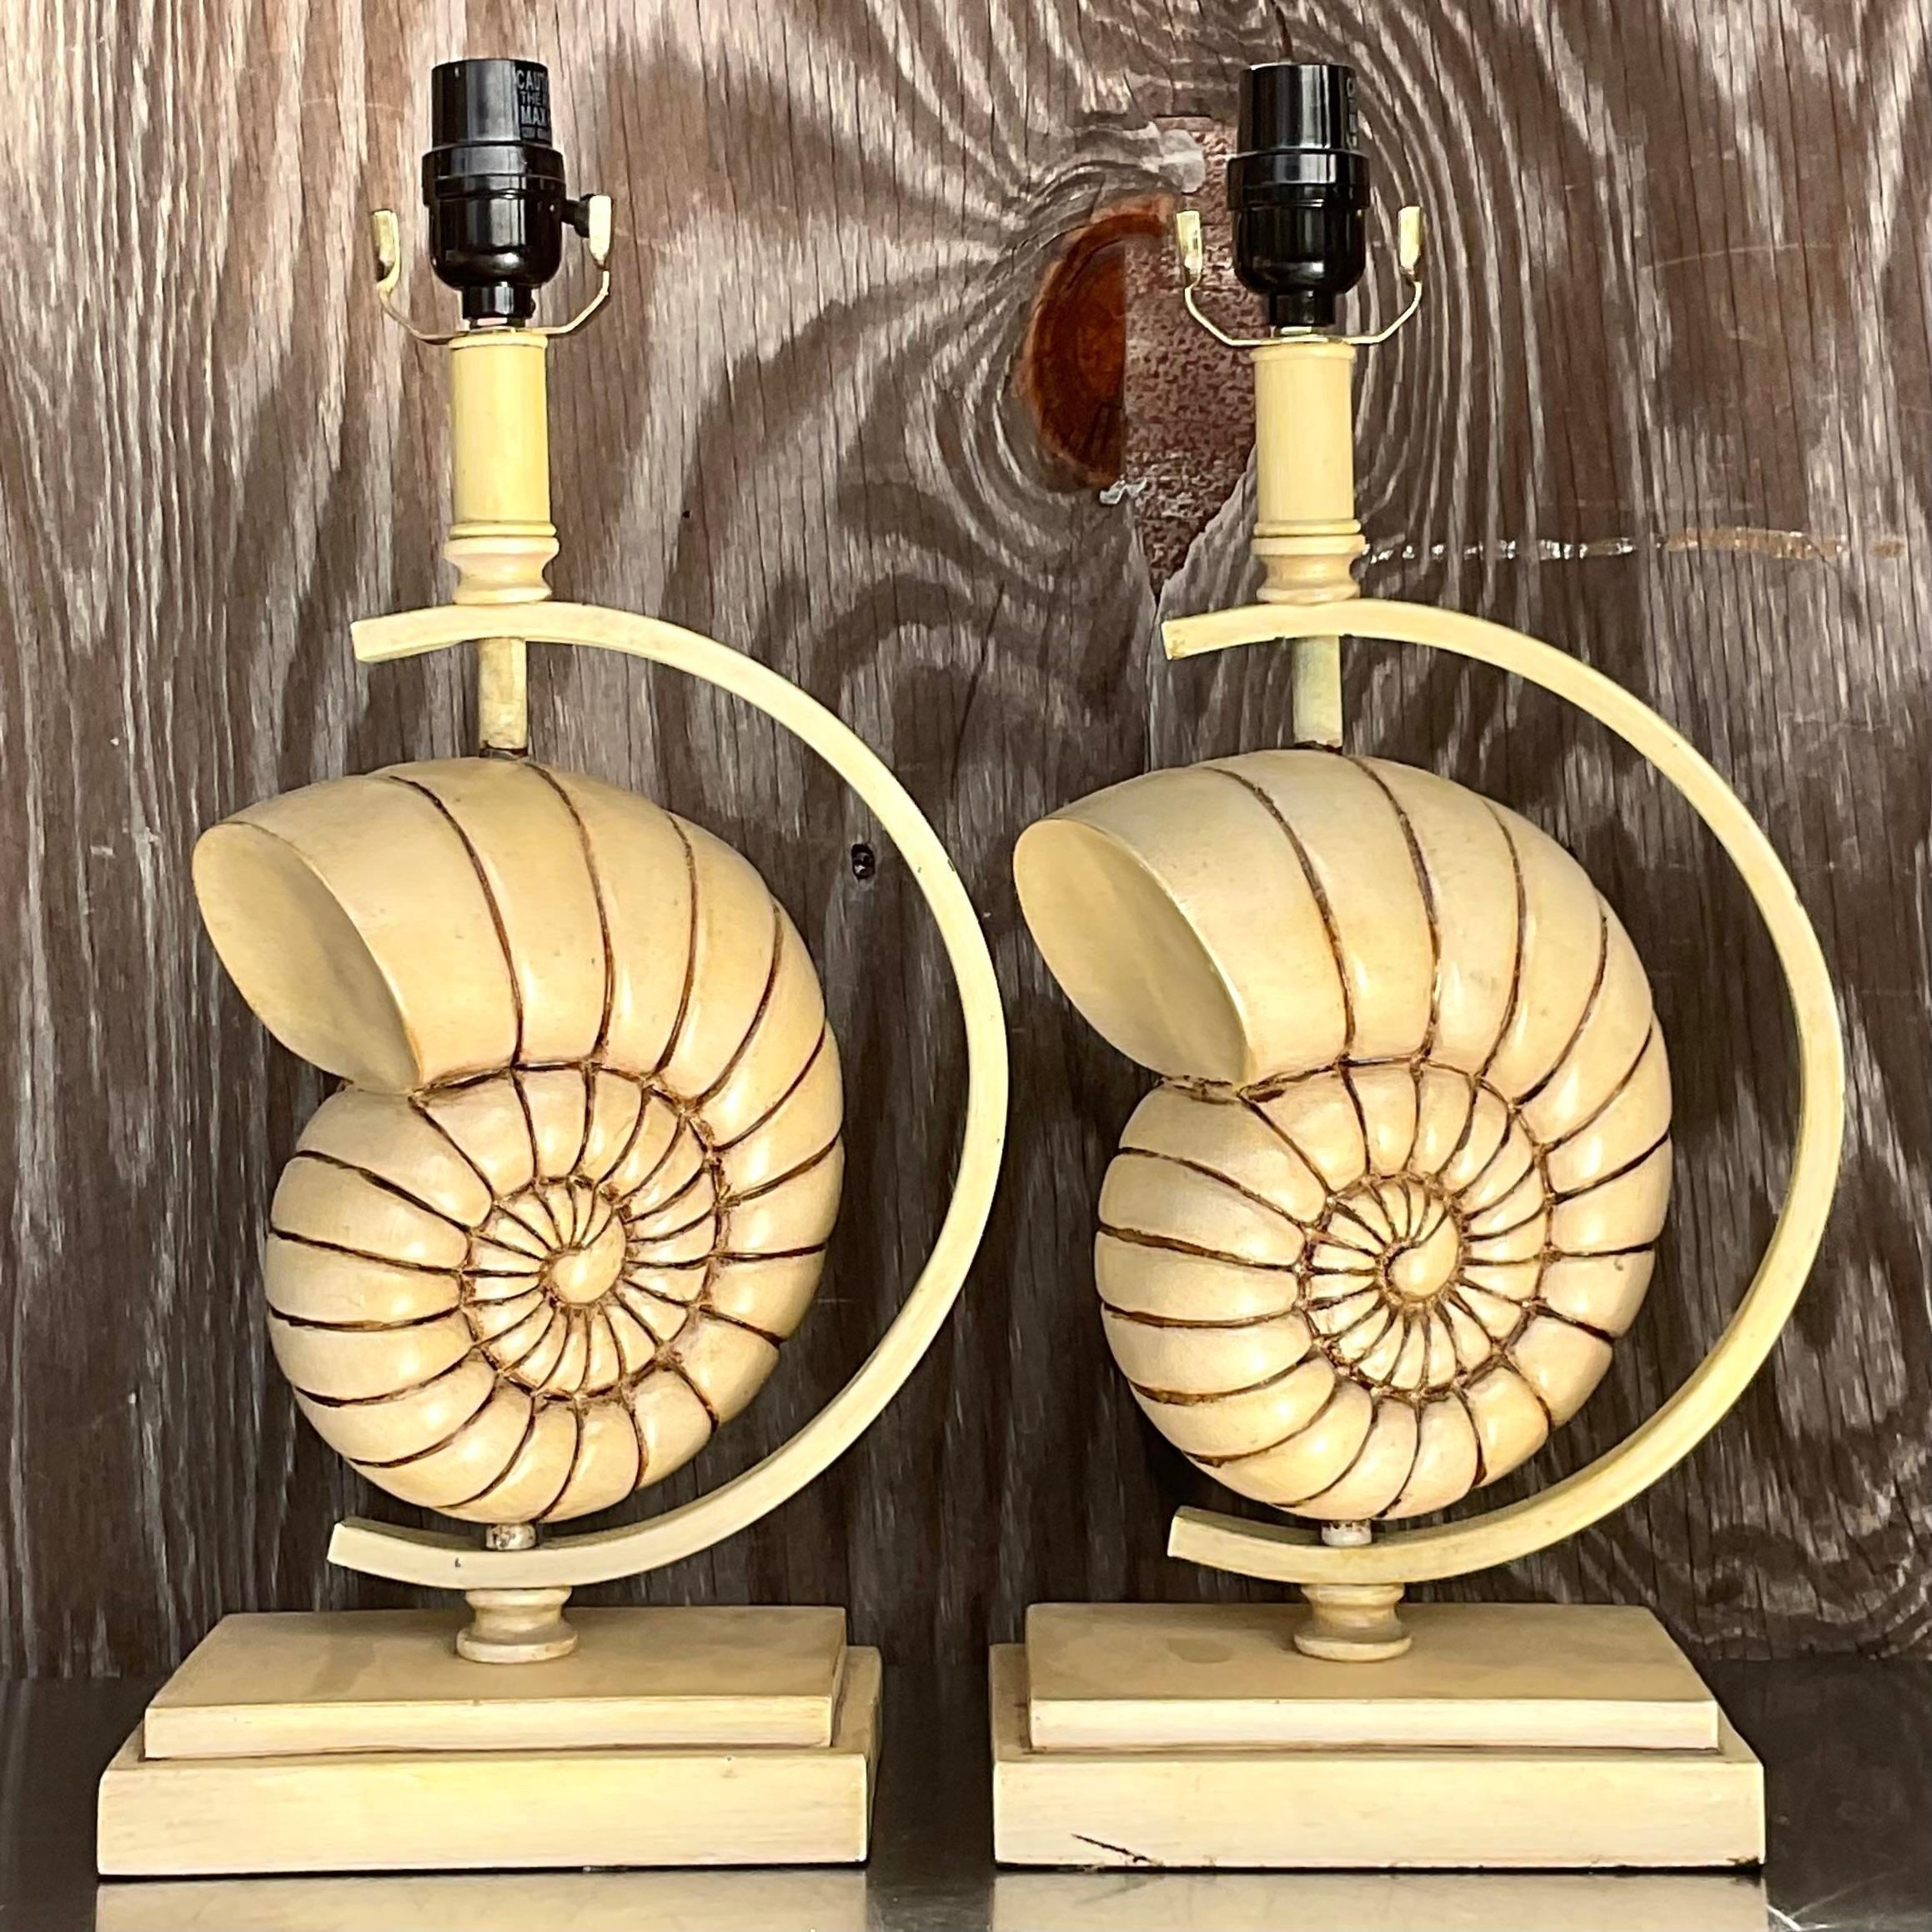 A fabulous pair of vintage Coastal table lamps. A chic carved nautilus shell that’s spins inside a metal frame. Acquired from a Palm Beach estate.